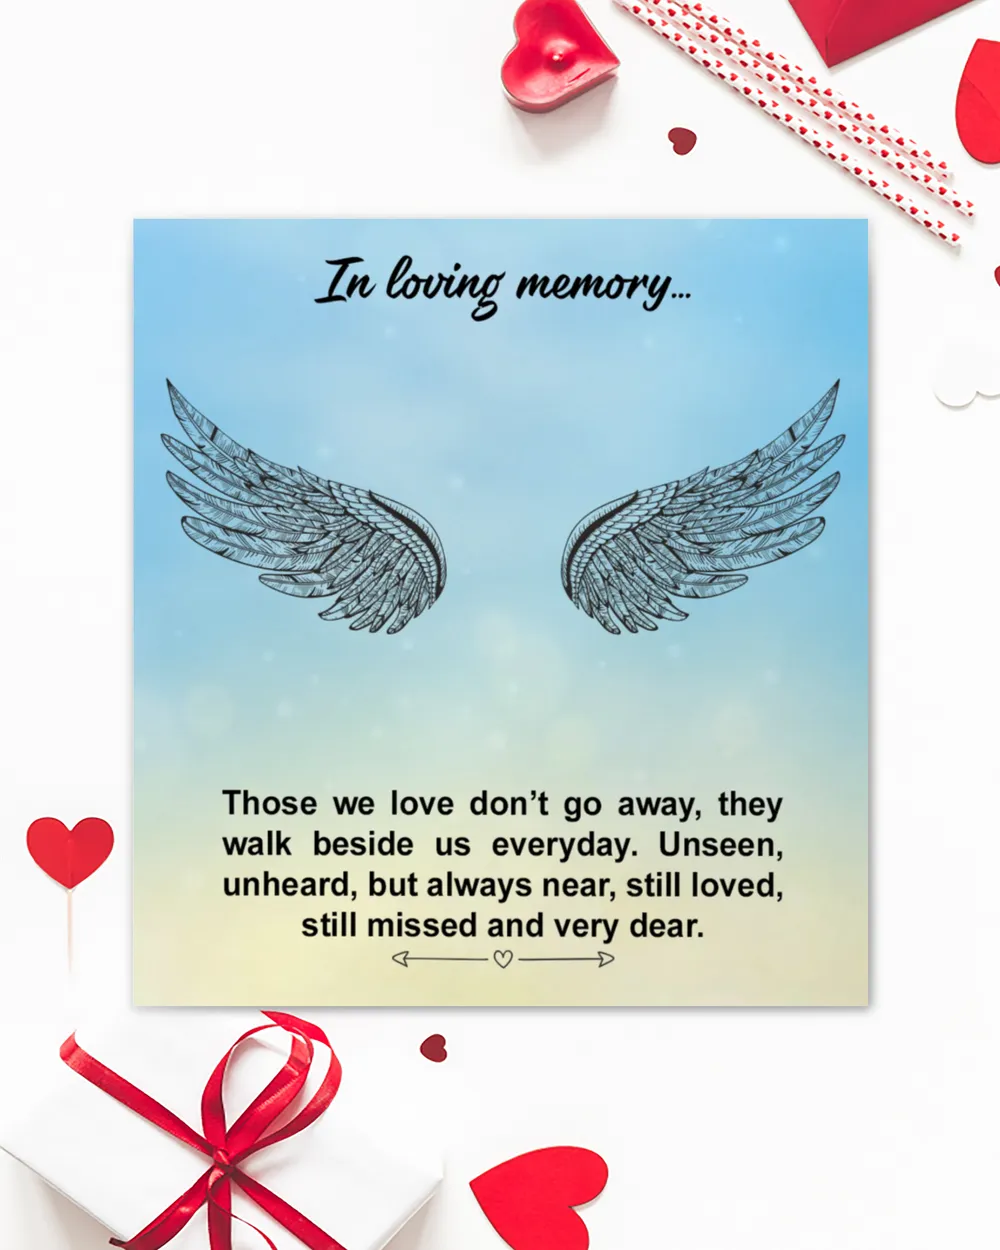 In loving memory... Those we love don’t go away